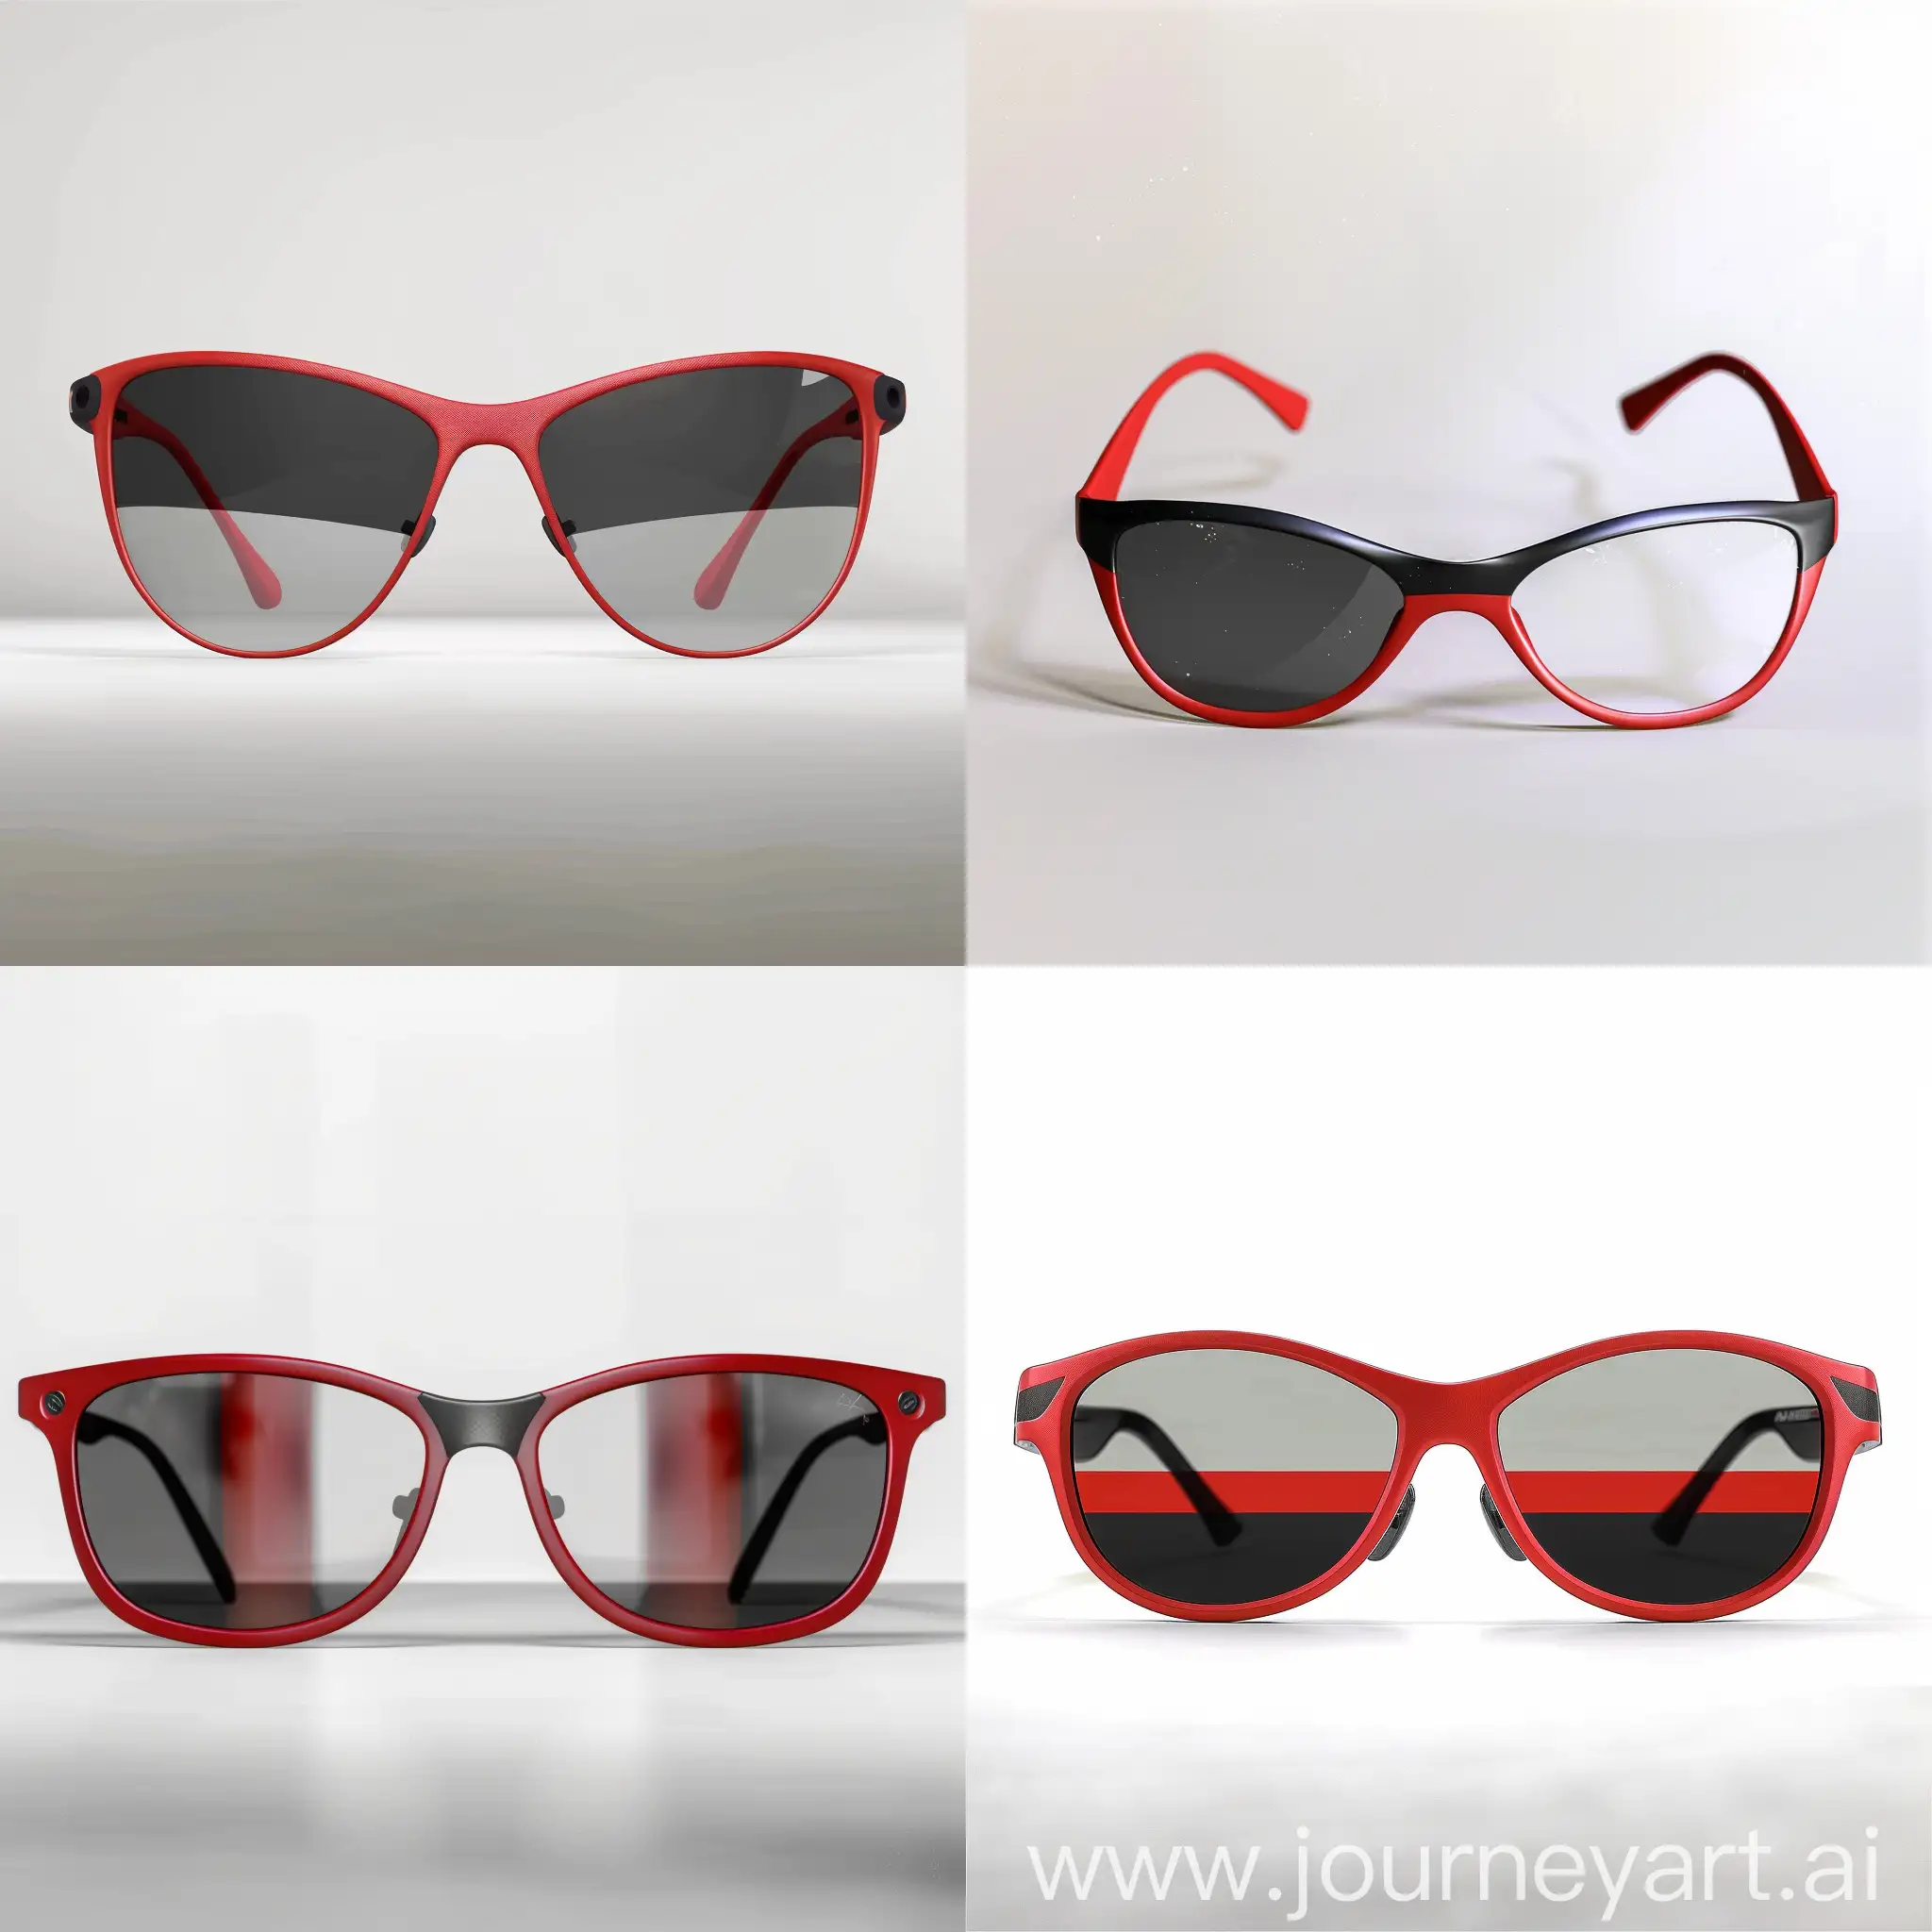 Create realistic 3D sports glasses, as if it were a studio photo with a white background. Strong red temple, black lens. Make them thin and light, very sporty, polarized lens between red and black, make the polarized gradient more natural as if they were polarized glasses, the gradient does not have to follow a pattern, it has to be a mix between the two natural colors